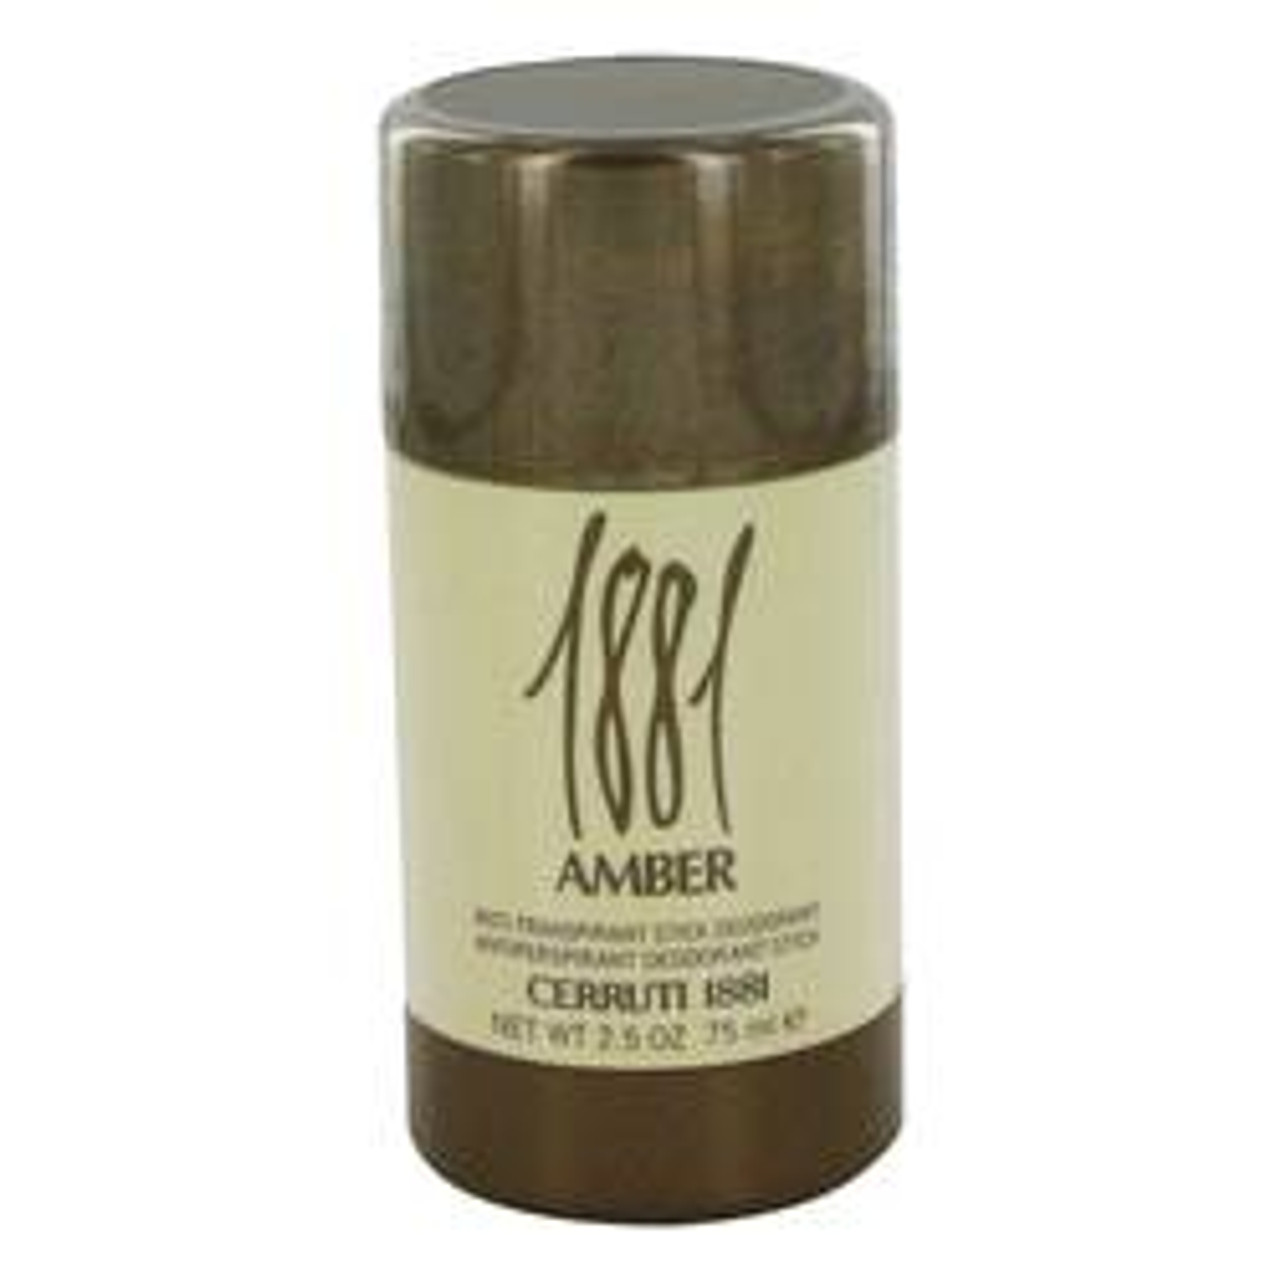 1881 Amber Cologne By Nino Cerruti Deodorant Stick 2.5 oz for Men - [From 67.00 - Choose pk Qty ] - *Ships from Miami